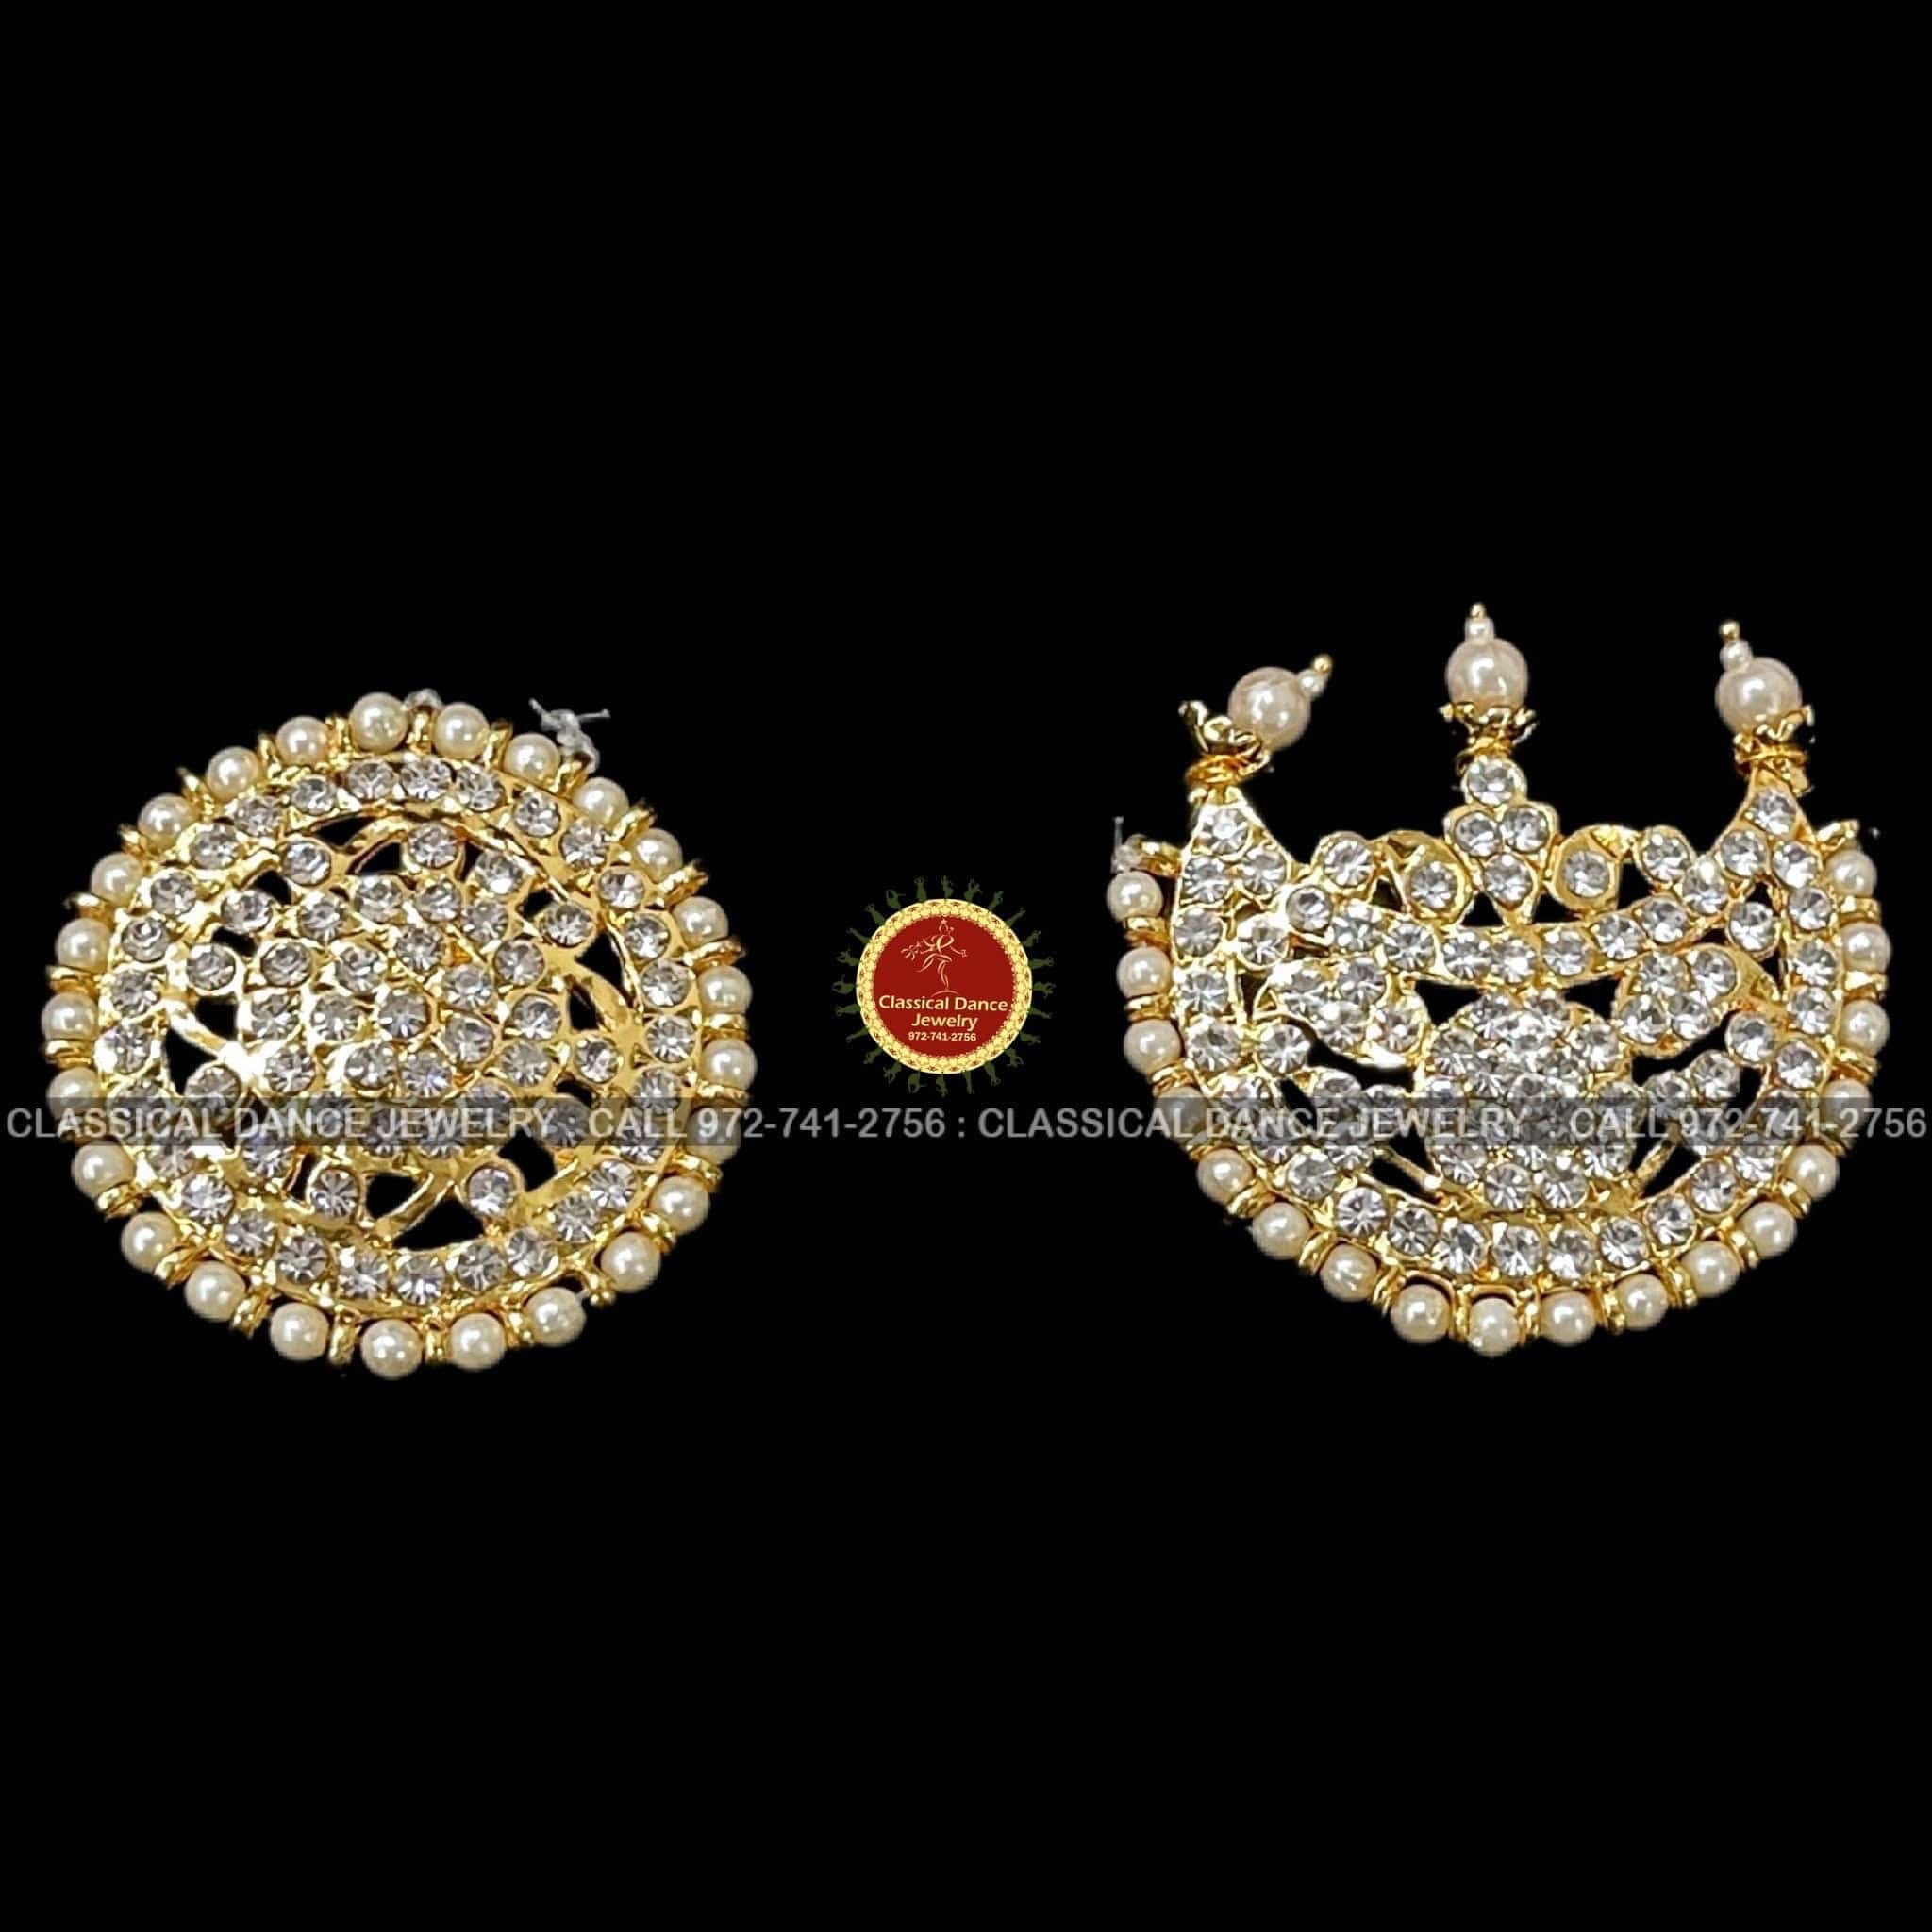 Flipkart.com - Buy Precious pearls Traditional White Stone South Indian  Meenakari Earrings for Girls and Womens Beads Alloy Jhumki Earring Online  at Best Prices in India